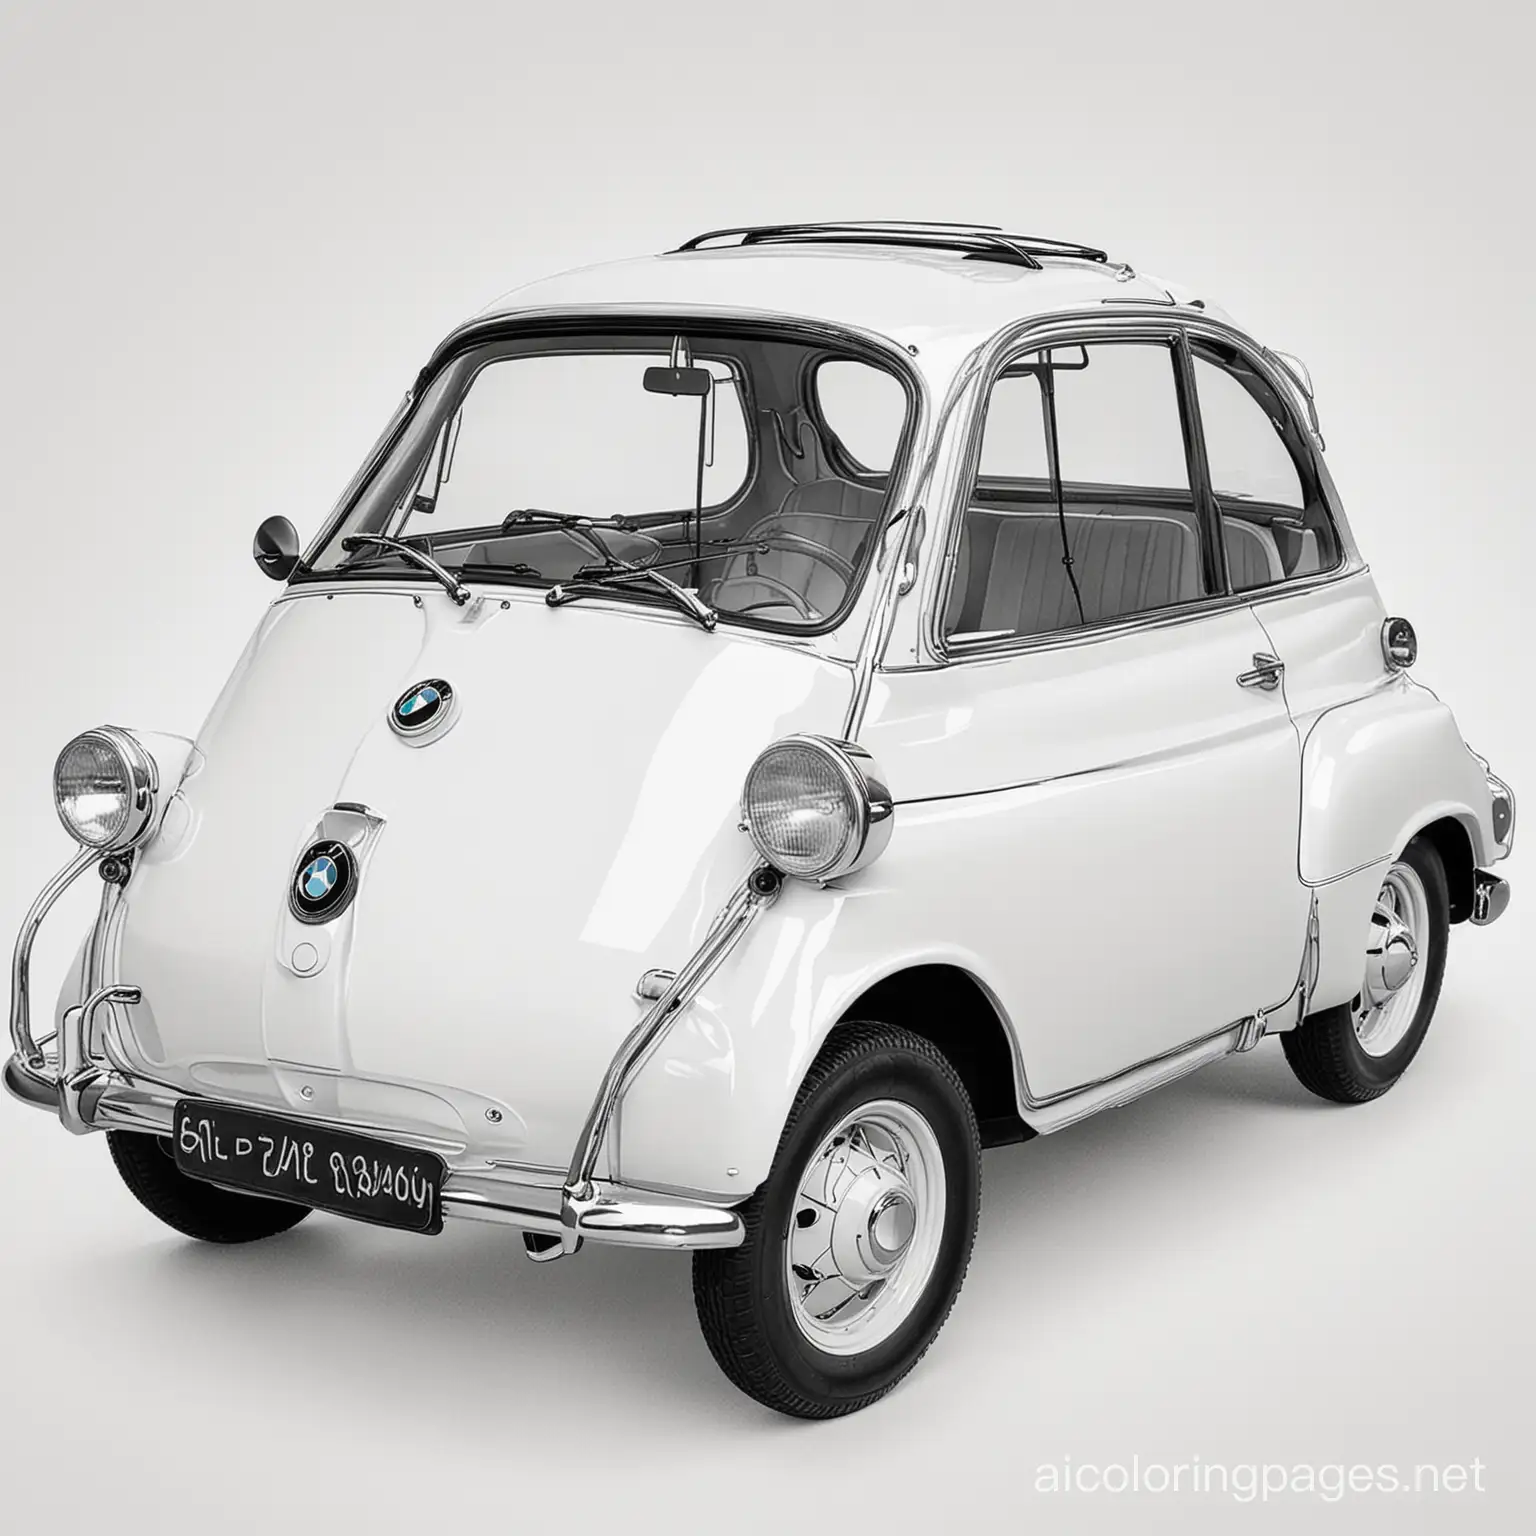 Create a sophisticated black line coloring page with a blank background of a 1956 BMW Isetta, Coloring Page, black and white, line art, white background, Simplicity, Ample White Space. The background of the coloring page is plain white to make it easy for young children to color within the lines. The outlines of all the subjects are easy to distinguish, making it simple for kids to color without too much difficulty